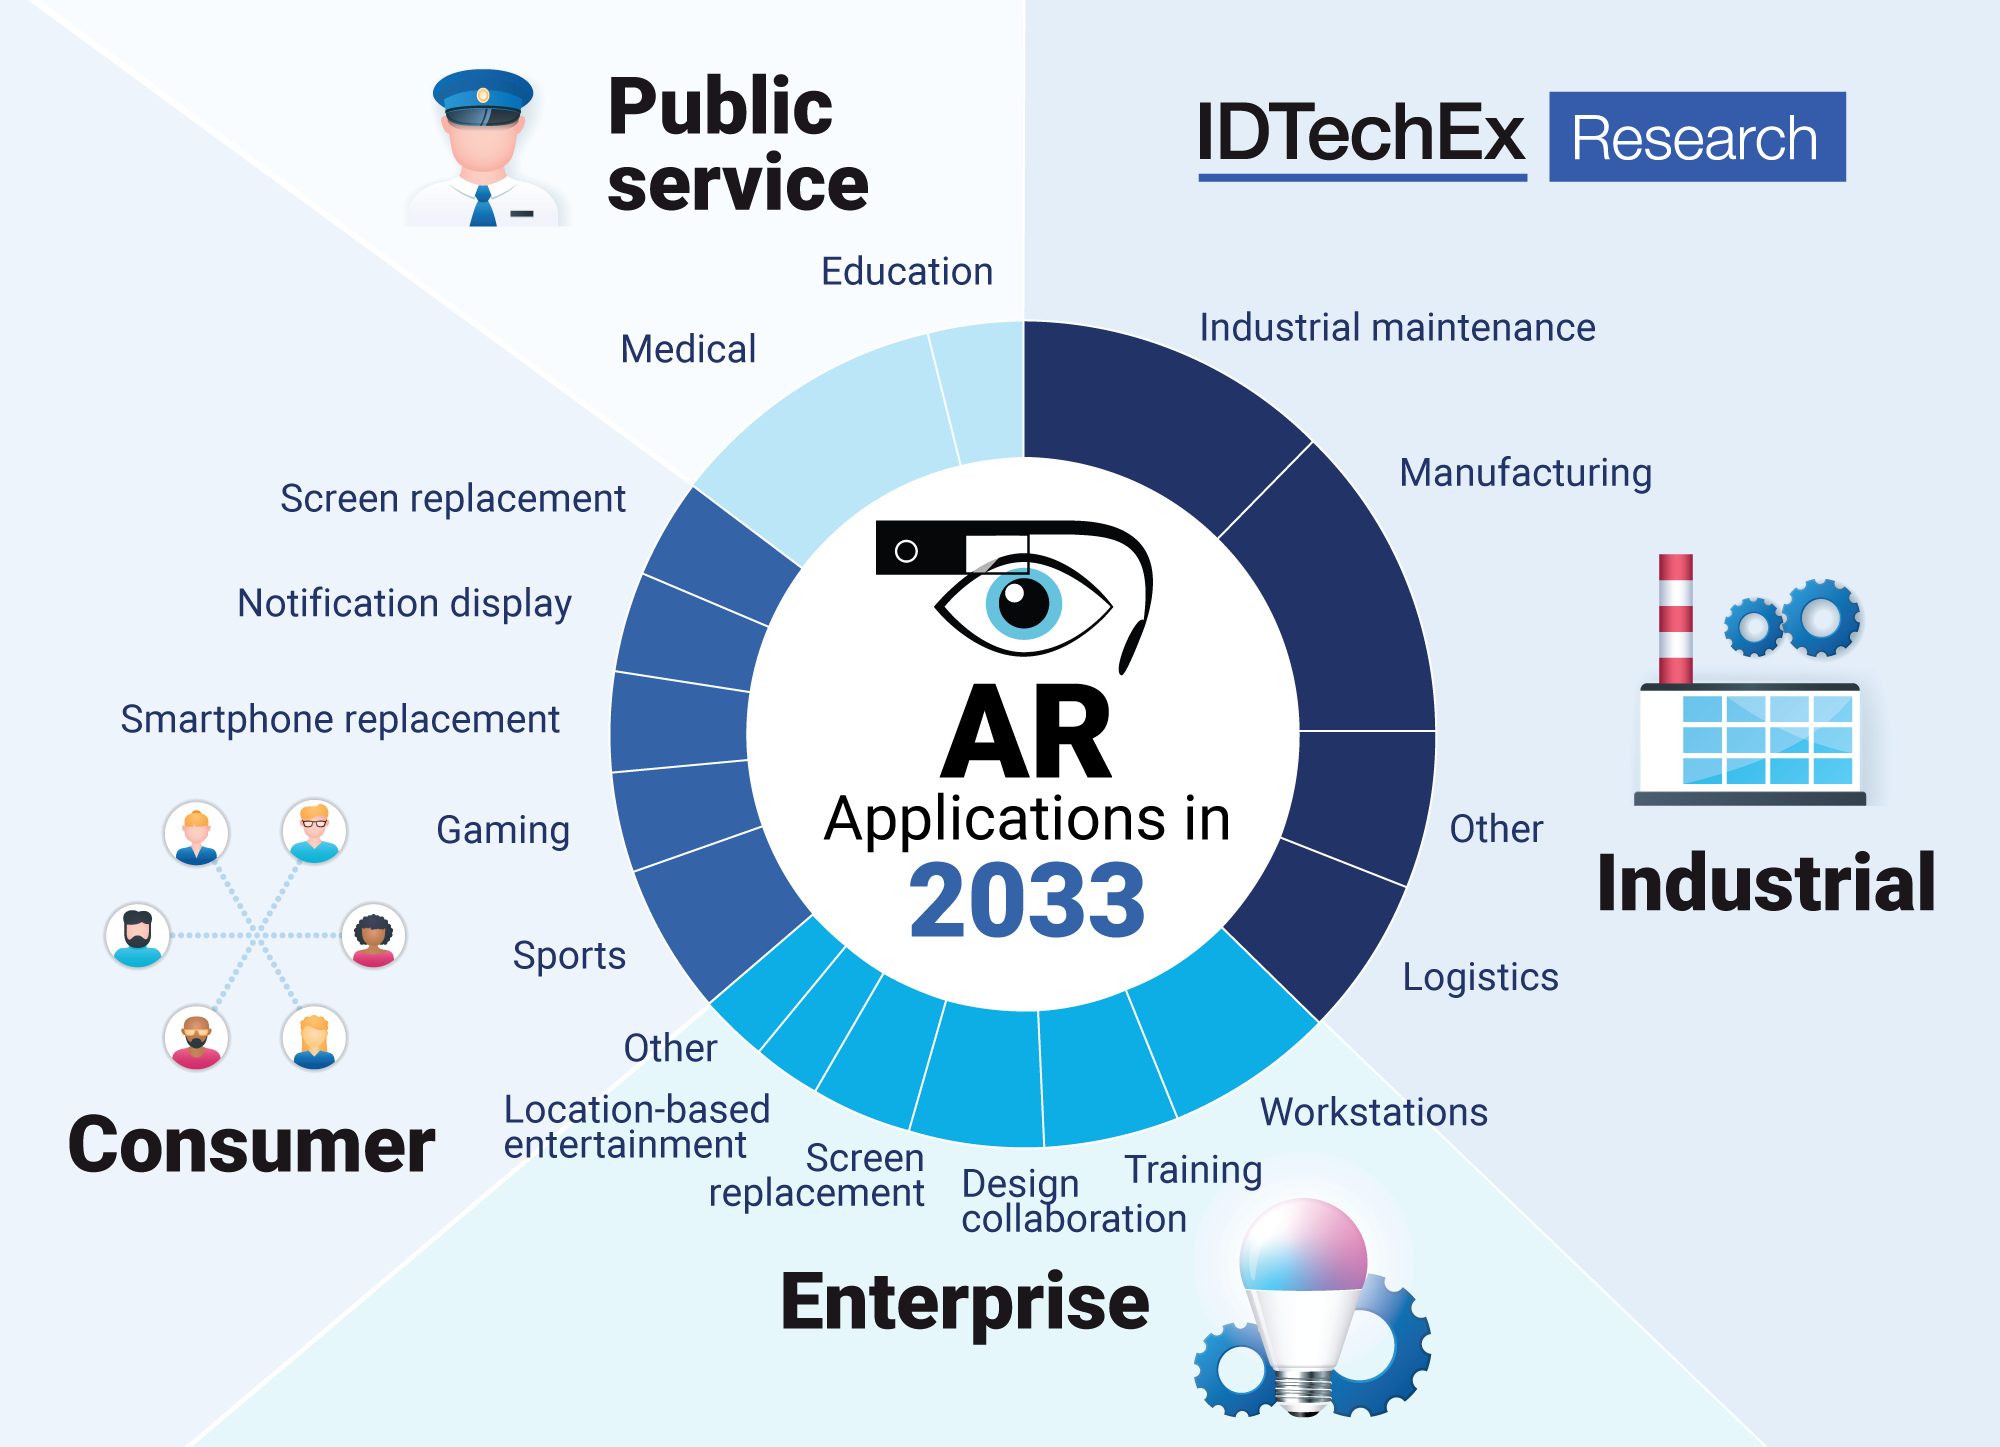 Augmented reality applications in 2033. Source: IDTechEx